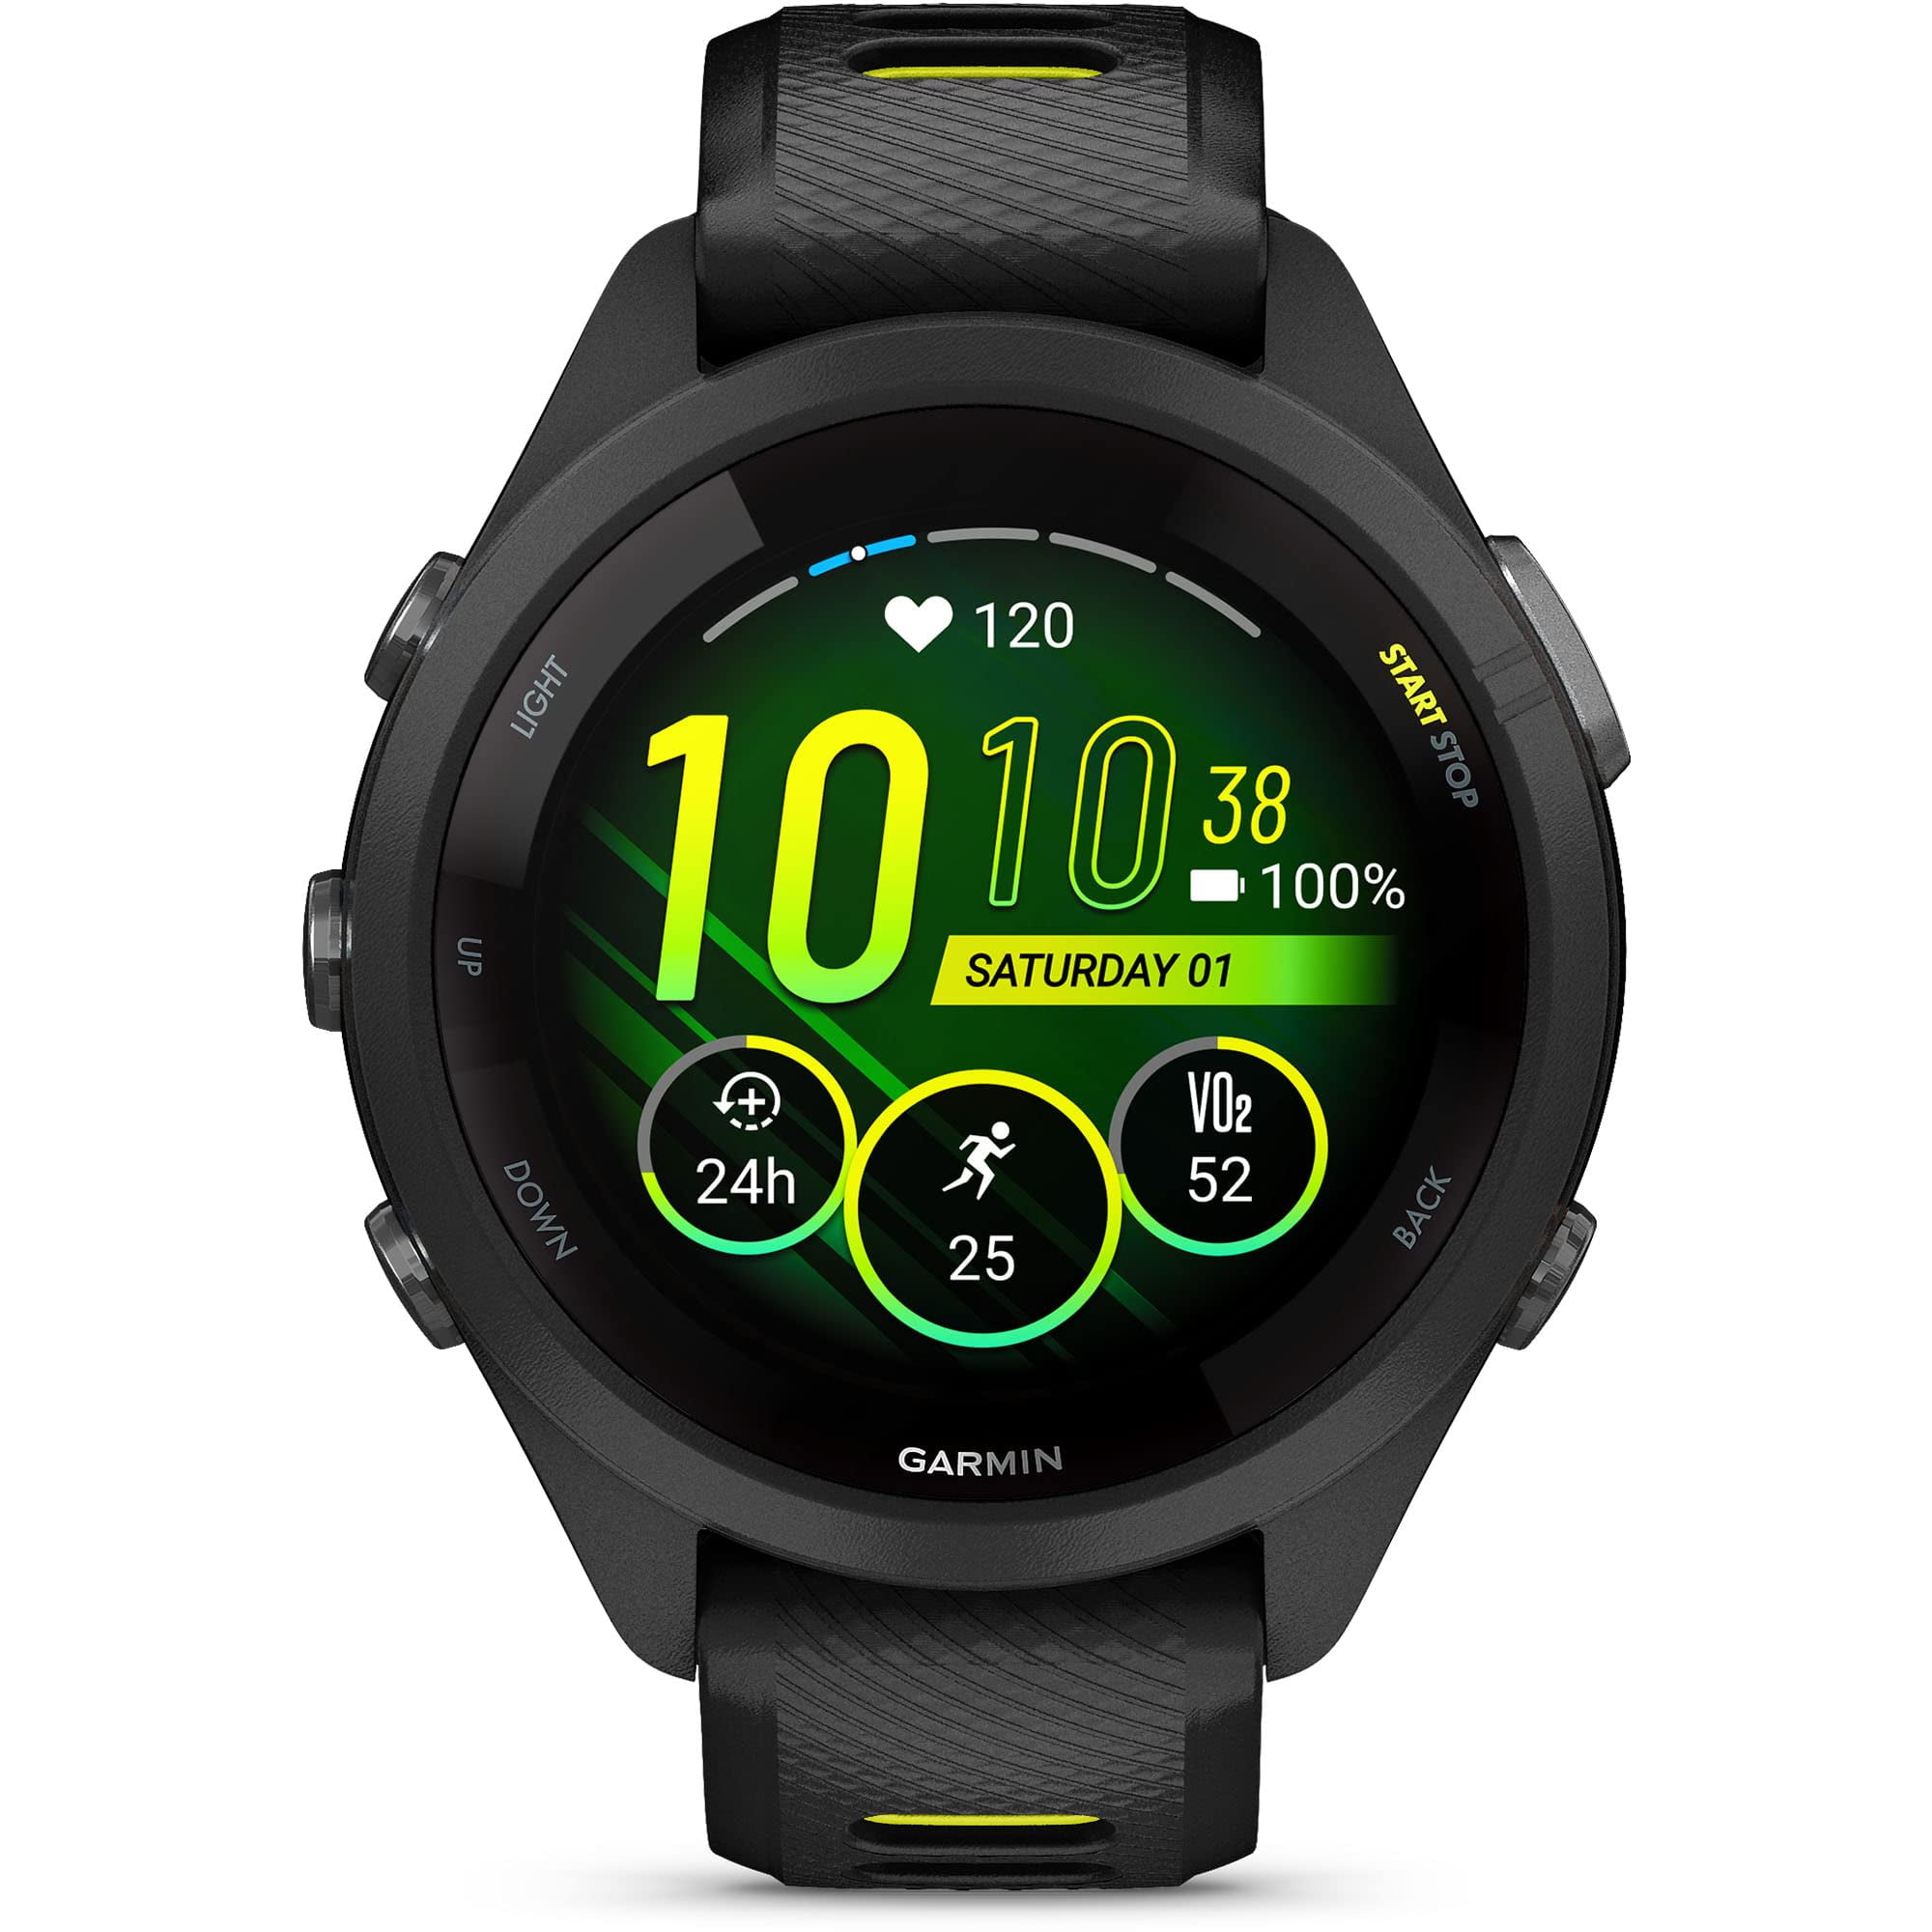 Garmin Forerunner 265 smartwatch review - excellent for sports tracking,  less so for mapping